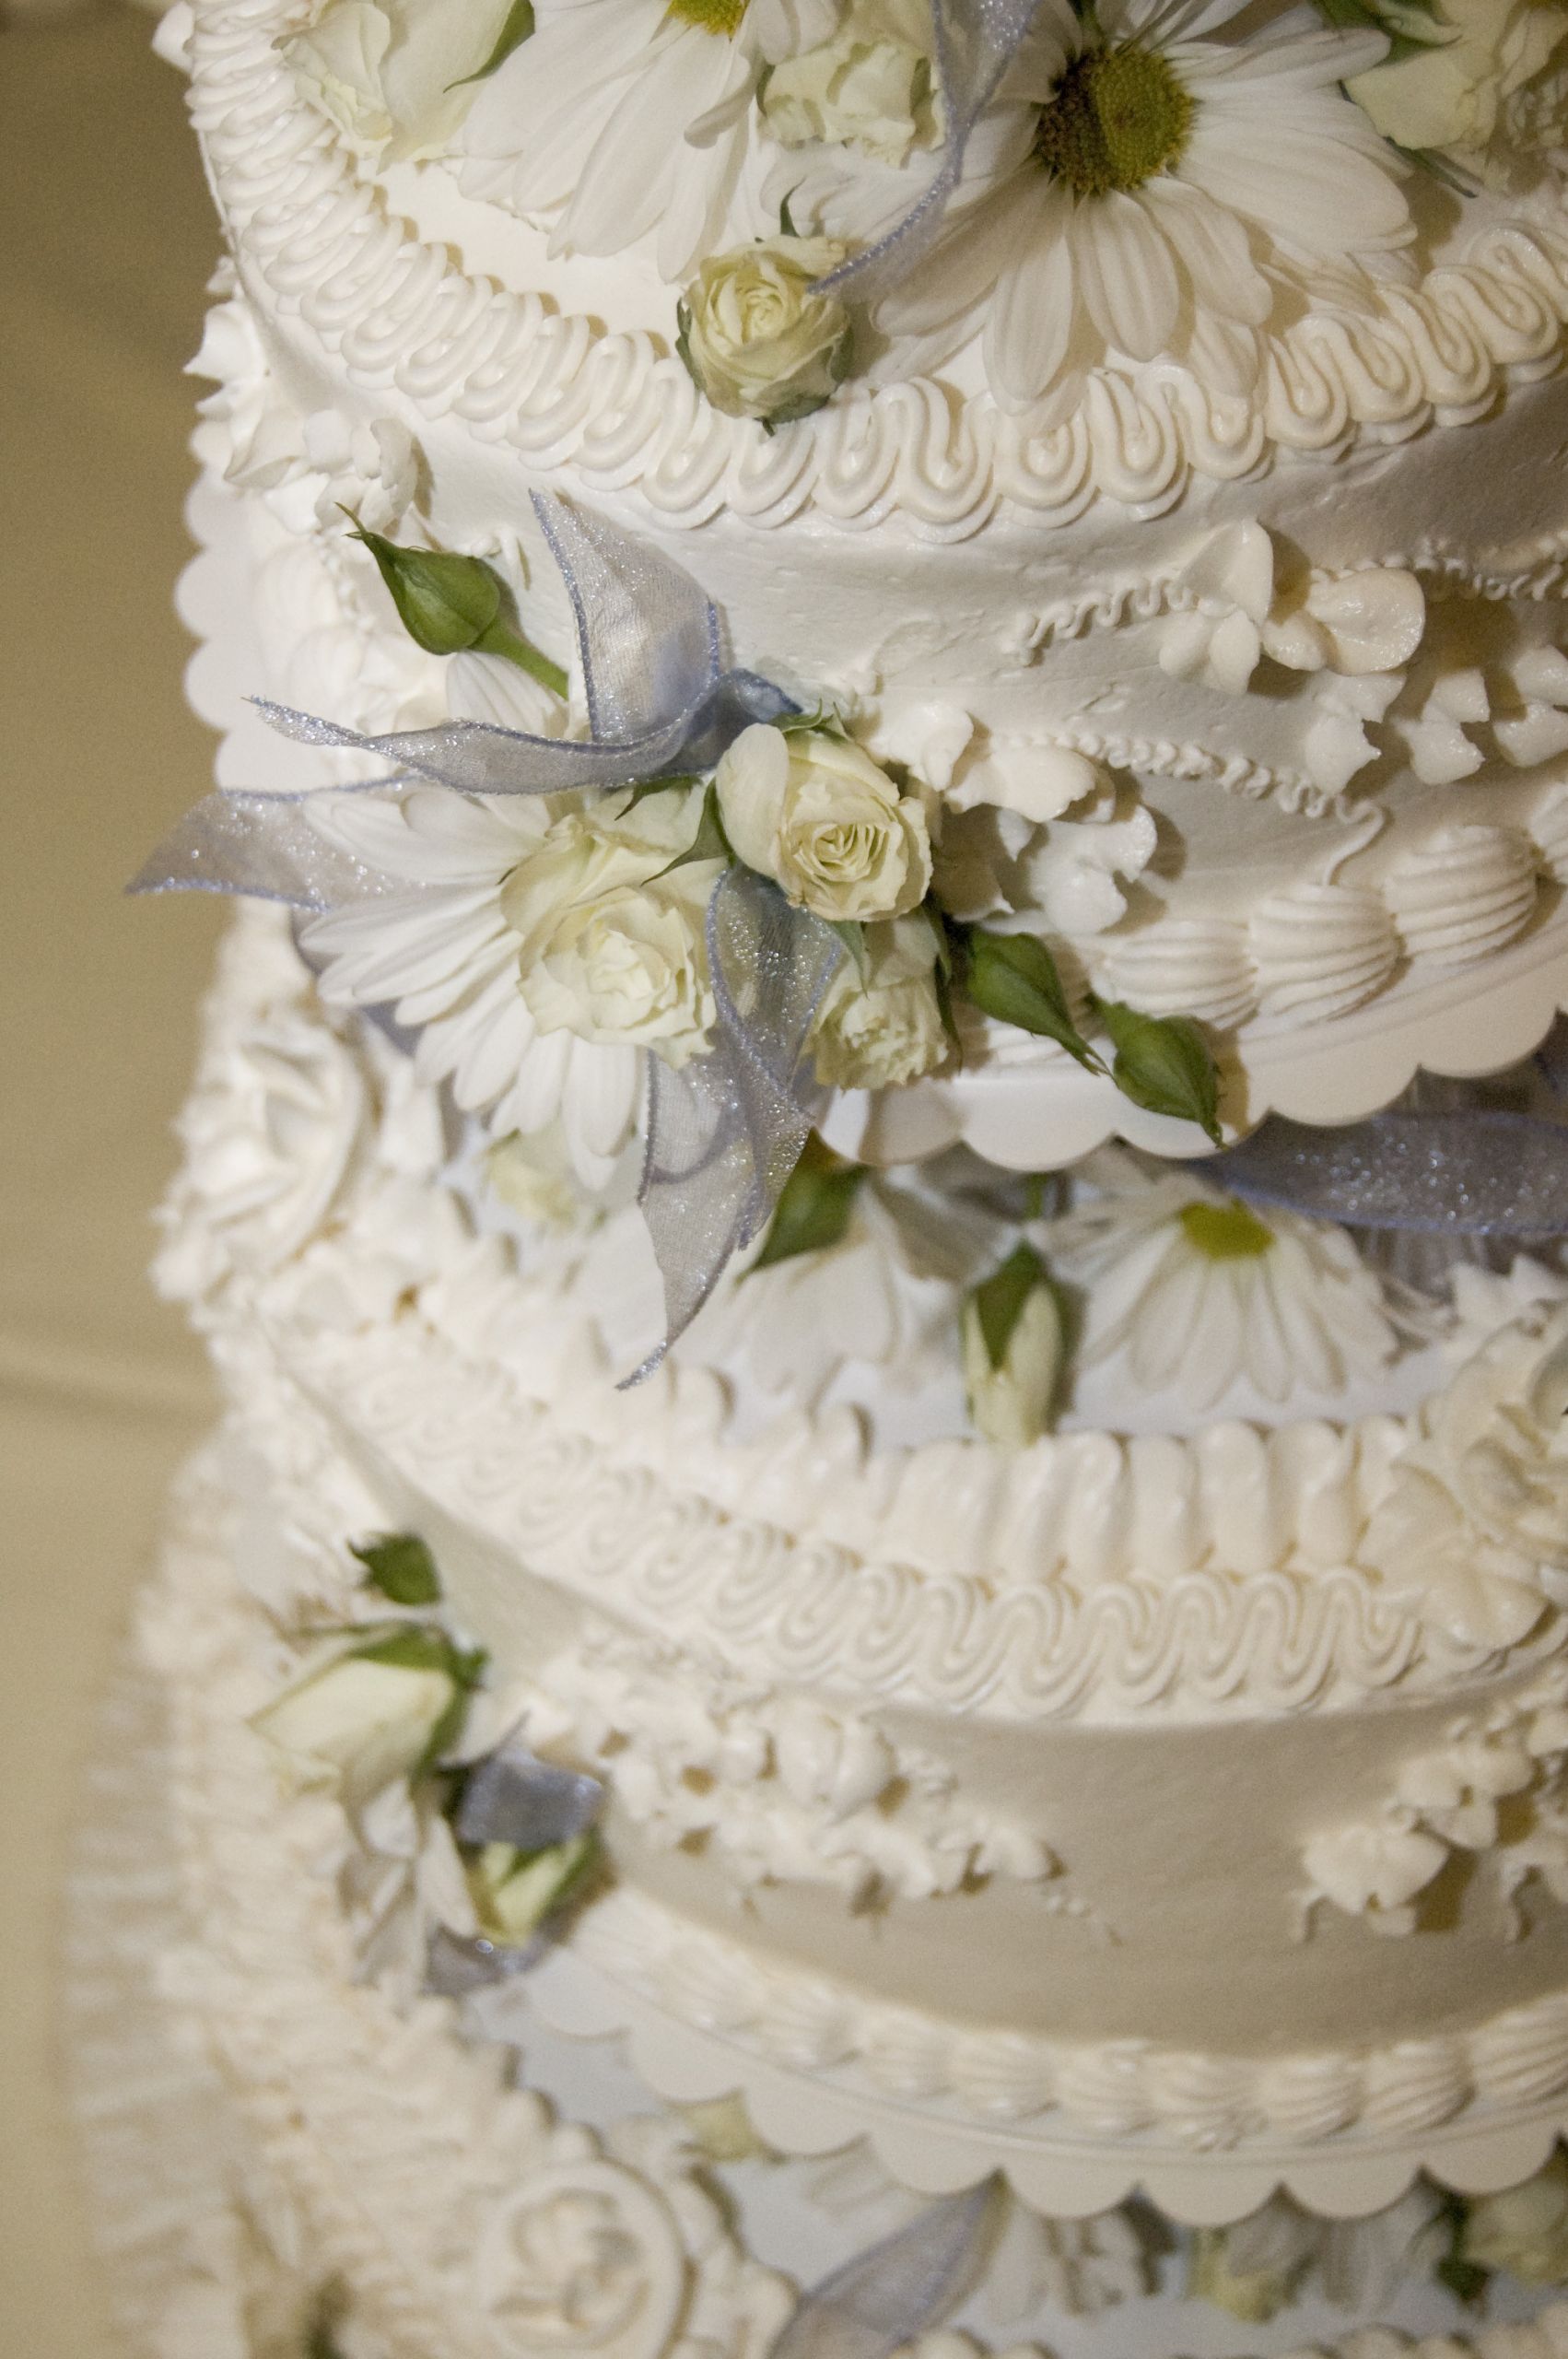 How To Decorate Wedding Cakes
 Instructions Decorating A Wedding Cake – Wedding Cake